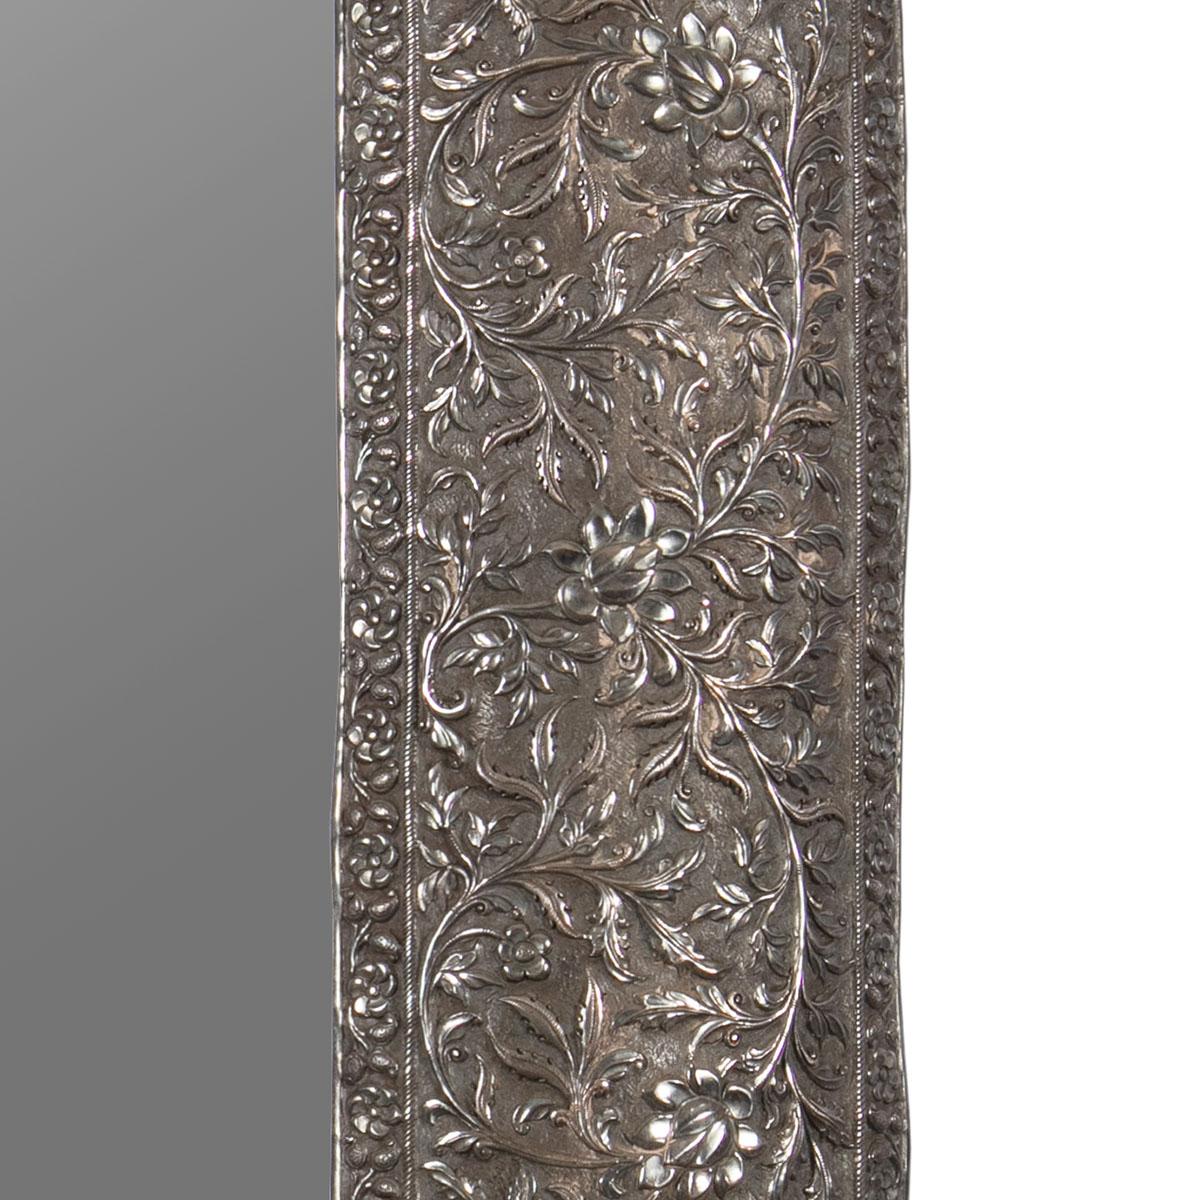 A fine mid-19th century Indian mirror frame, the frame of solid silver

Solid silver ornament is rare, much was melted down and repurposed

This repoussé mirror frame is finely modeled and chased with crisp detail

Only a member of the Mughal